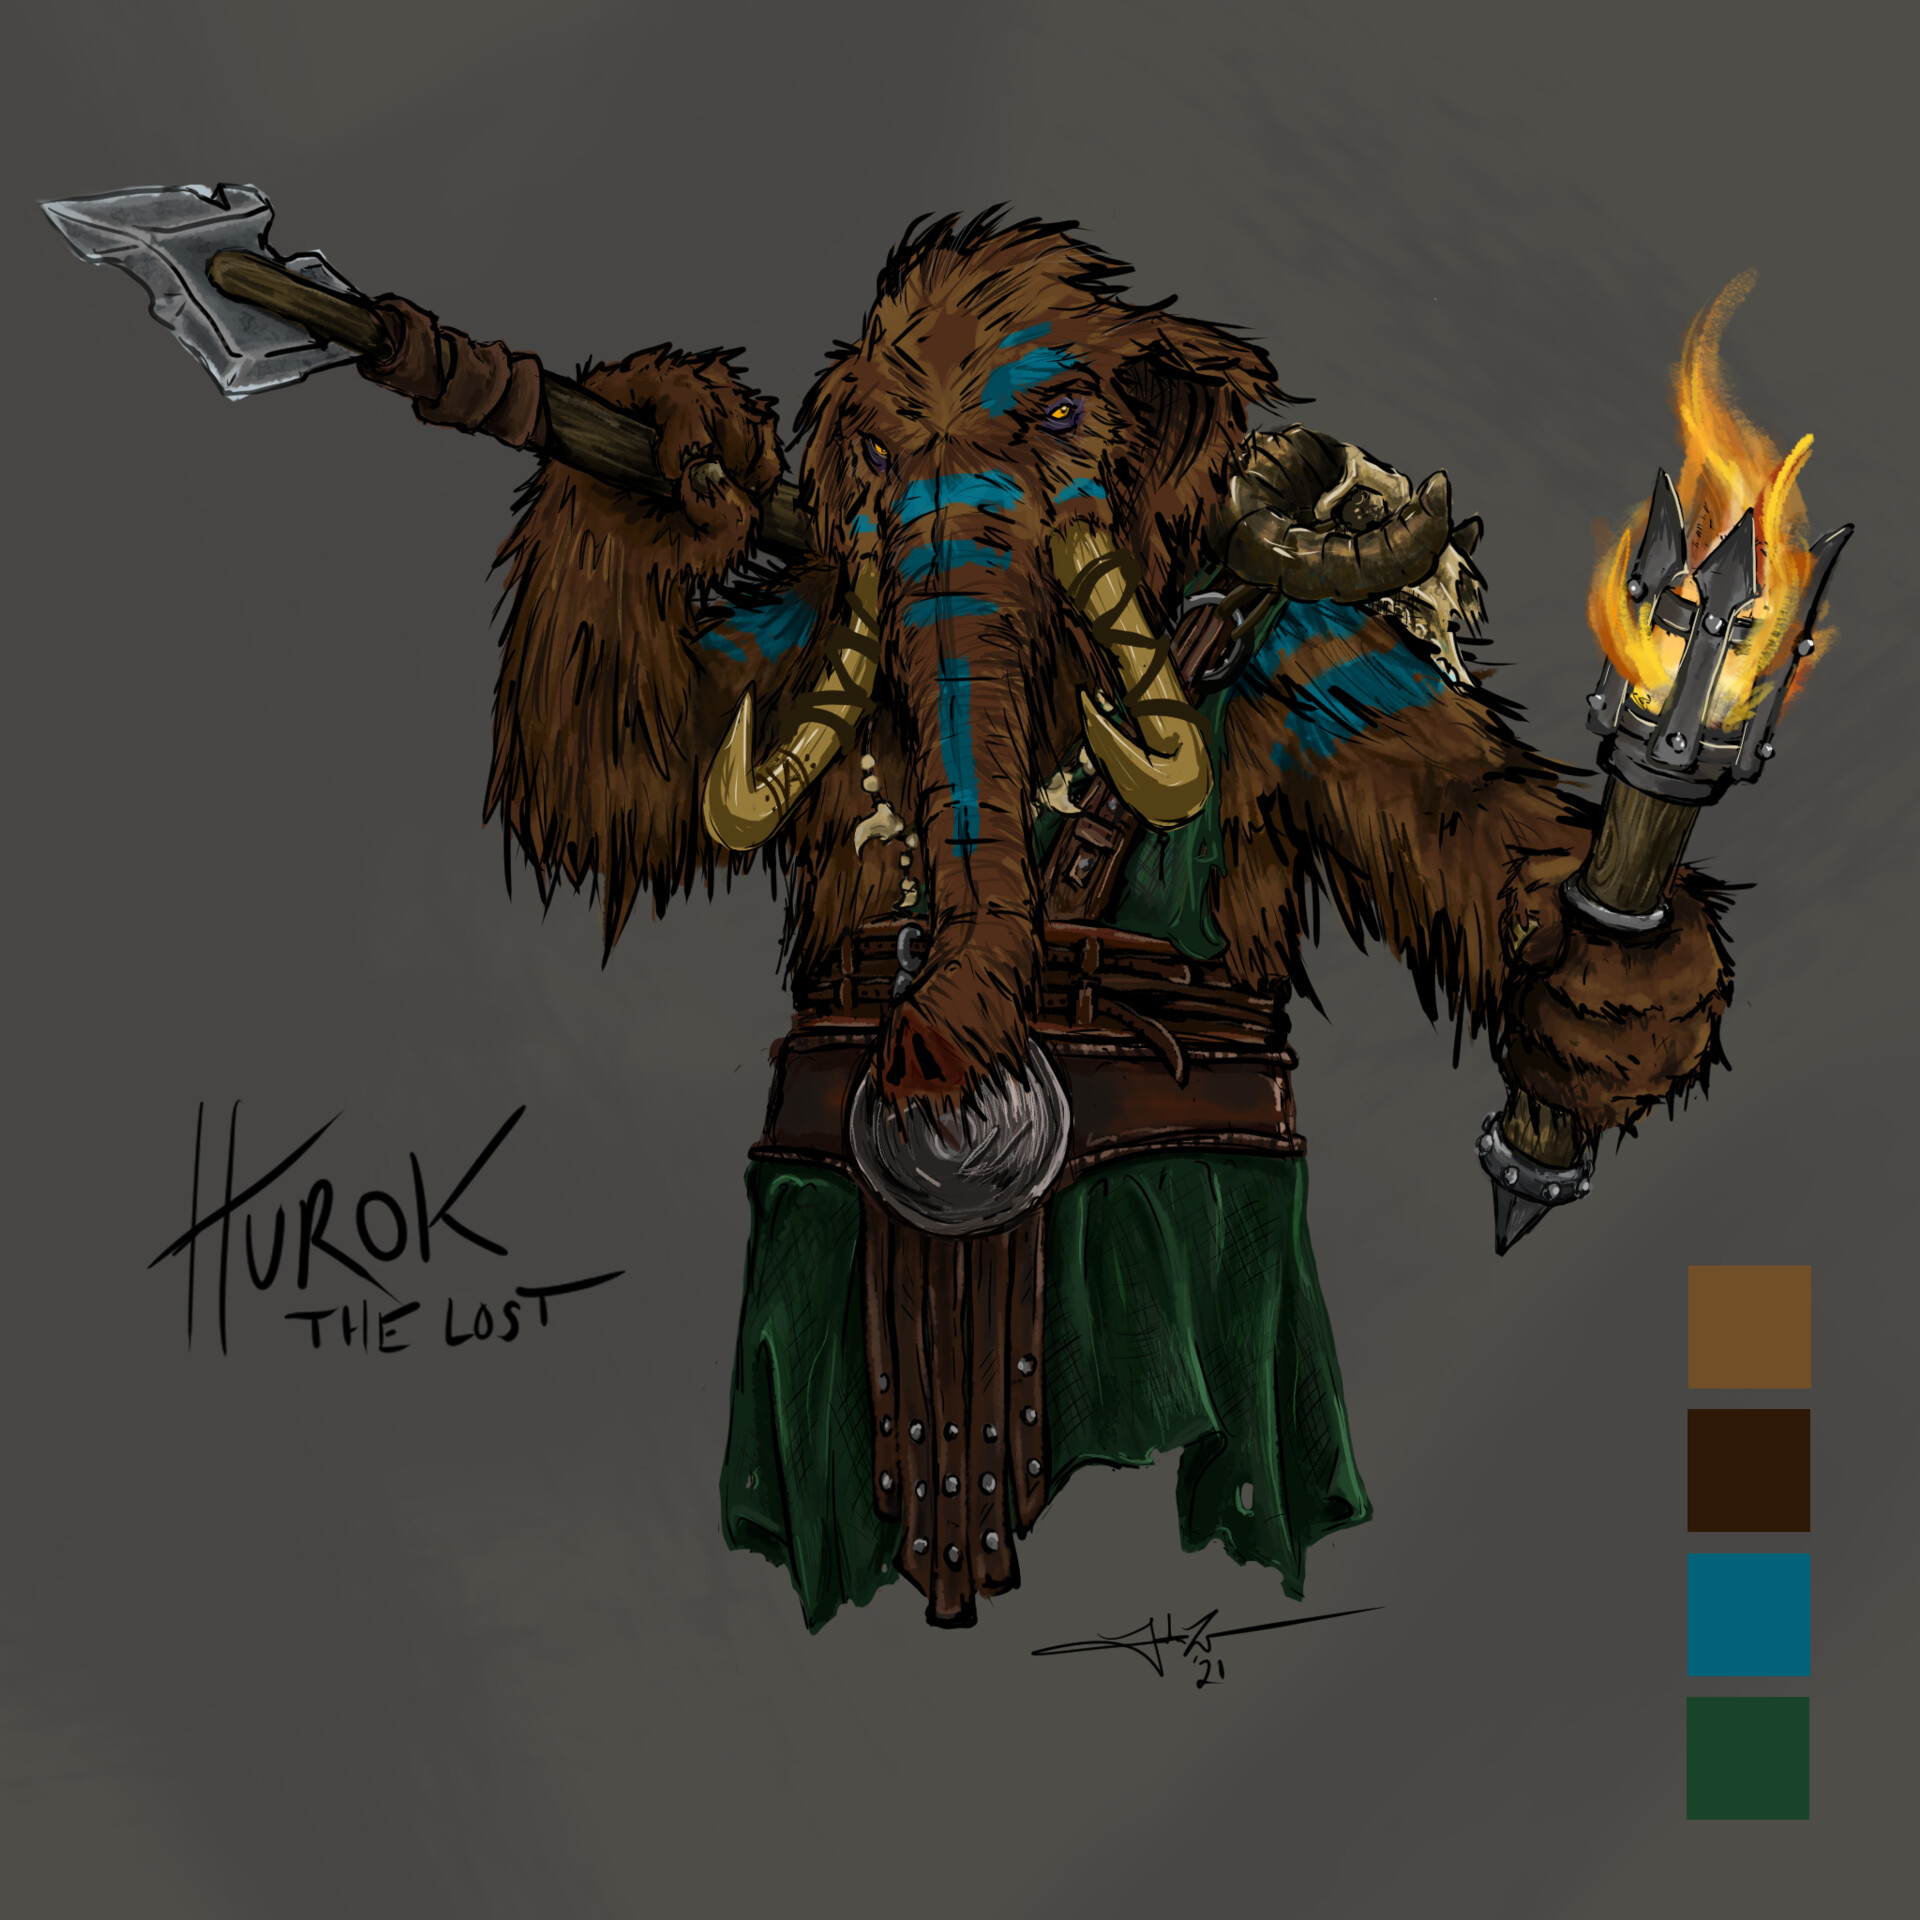 My loxo ranger Hurok.  Used him for an Icewind Dale campaign.  He gets dropped into Faerun by means of a rogue portal during a catastrophic rewriting of time in his realm due to Sarkhan Vol (Planeswalker).  He gains the attention of Sylvanas as he traveled through the frozen mountains and forests, eventually blessed with a icy swarm of crystal "spiders" that reside as permafrost and snow on his fur and tusks.  I should probably finish this one day.